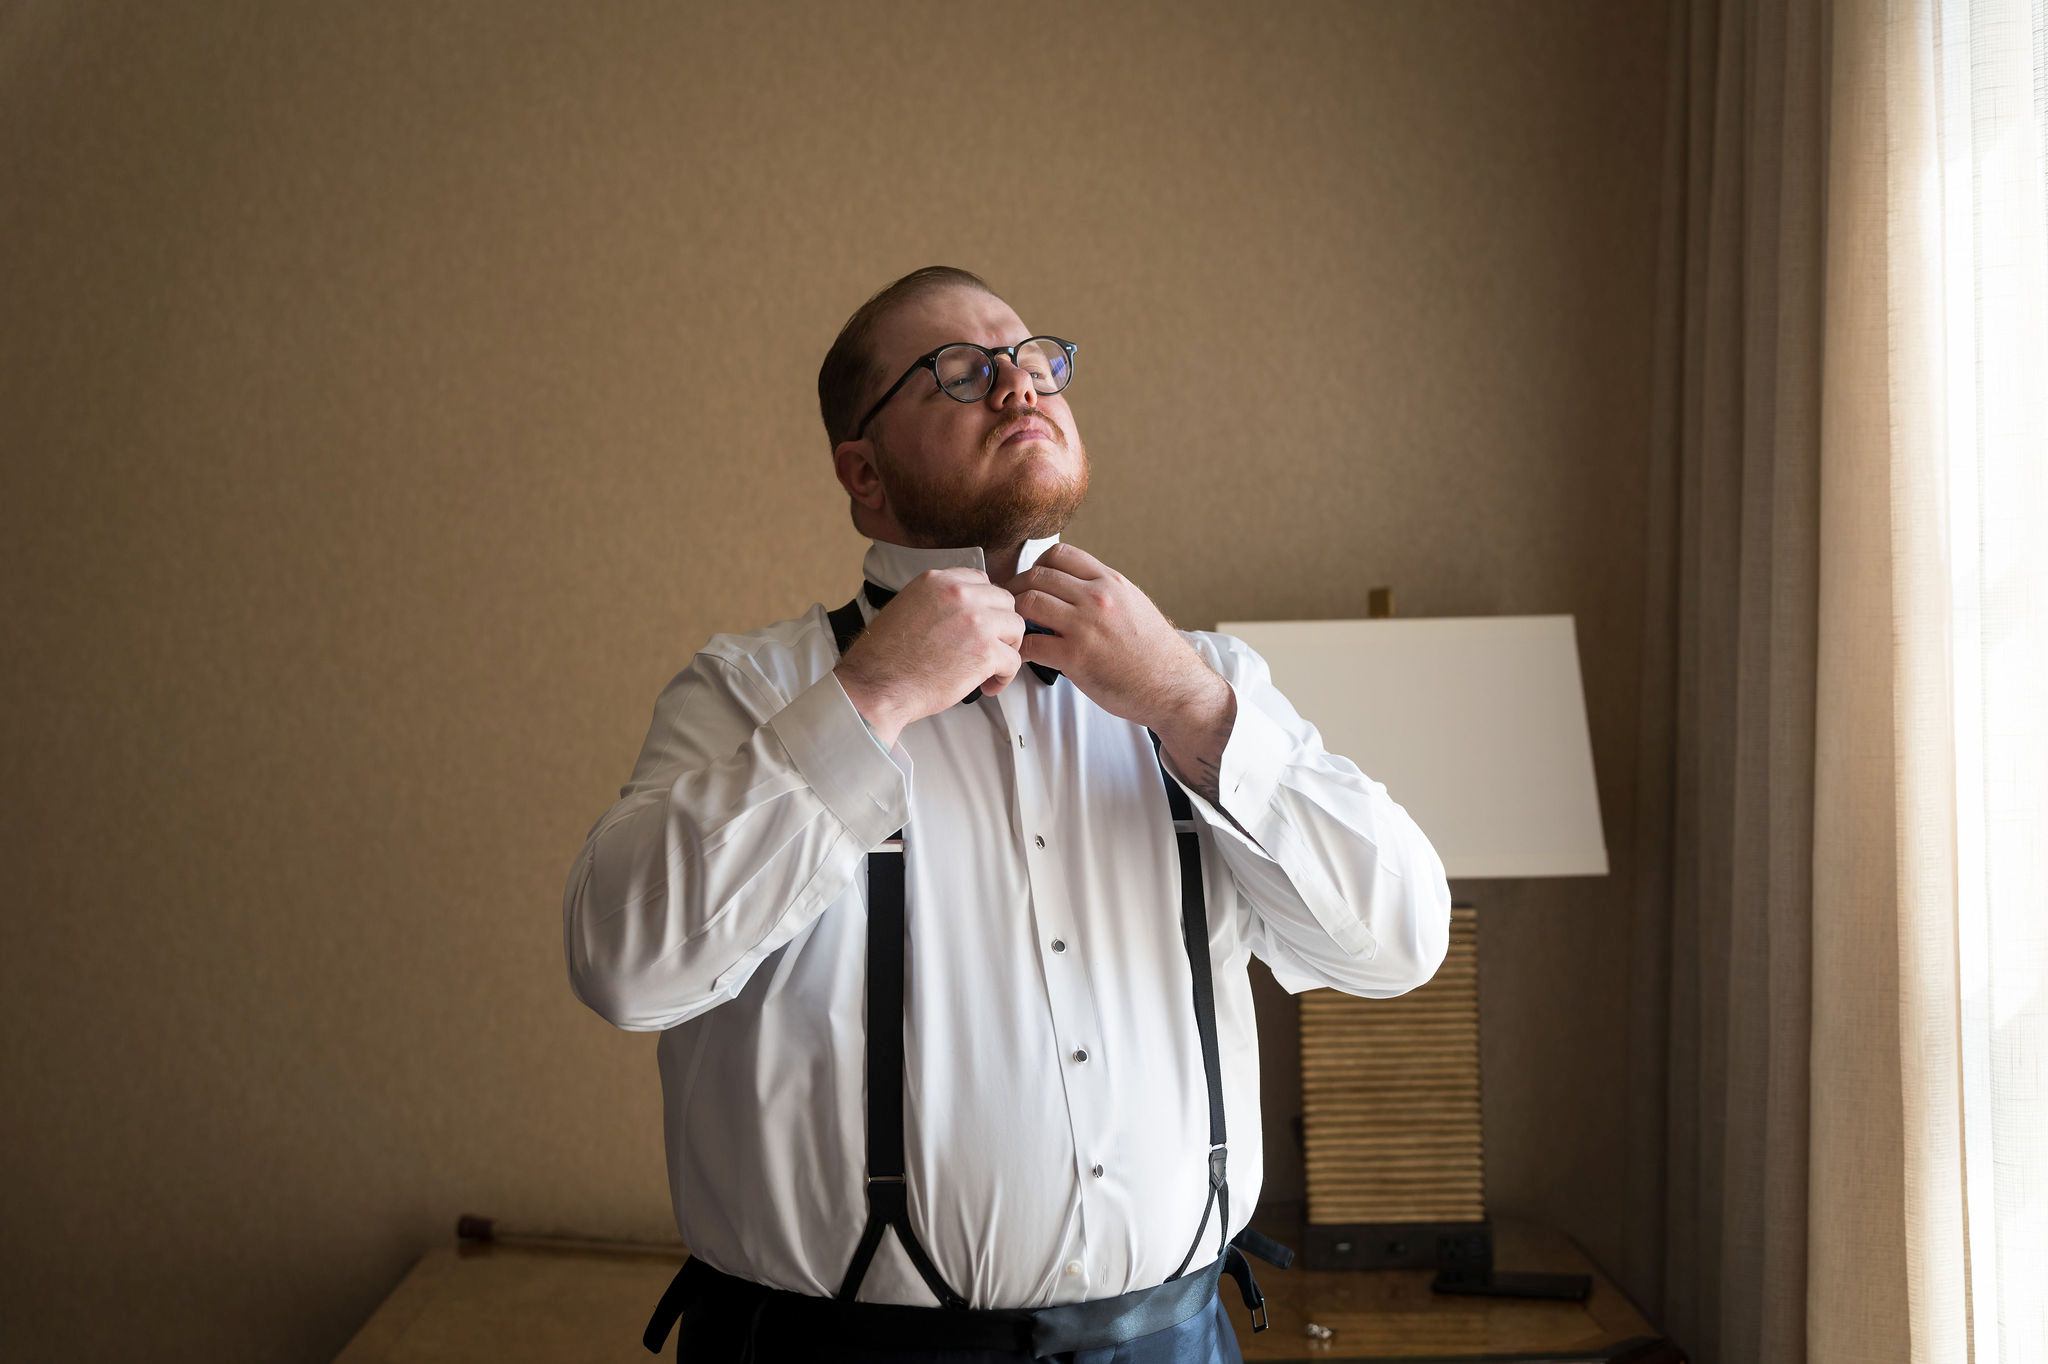 A man fixes his bowtie in a hotel room of the Royal Park Hotel.